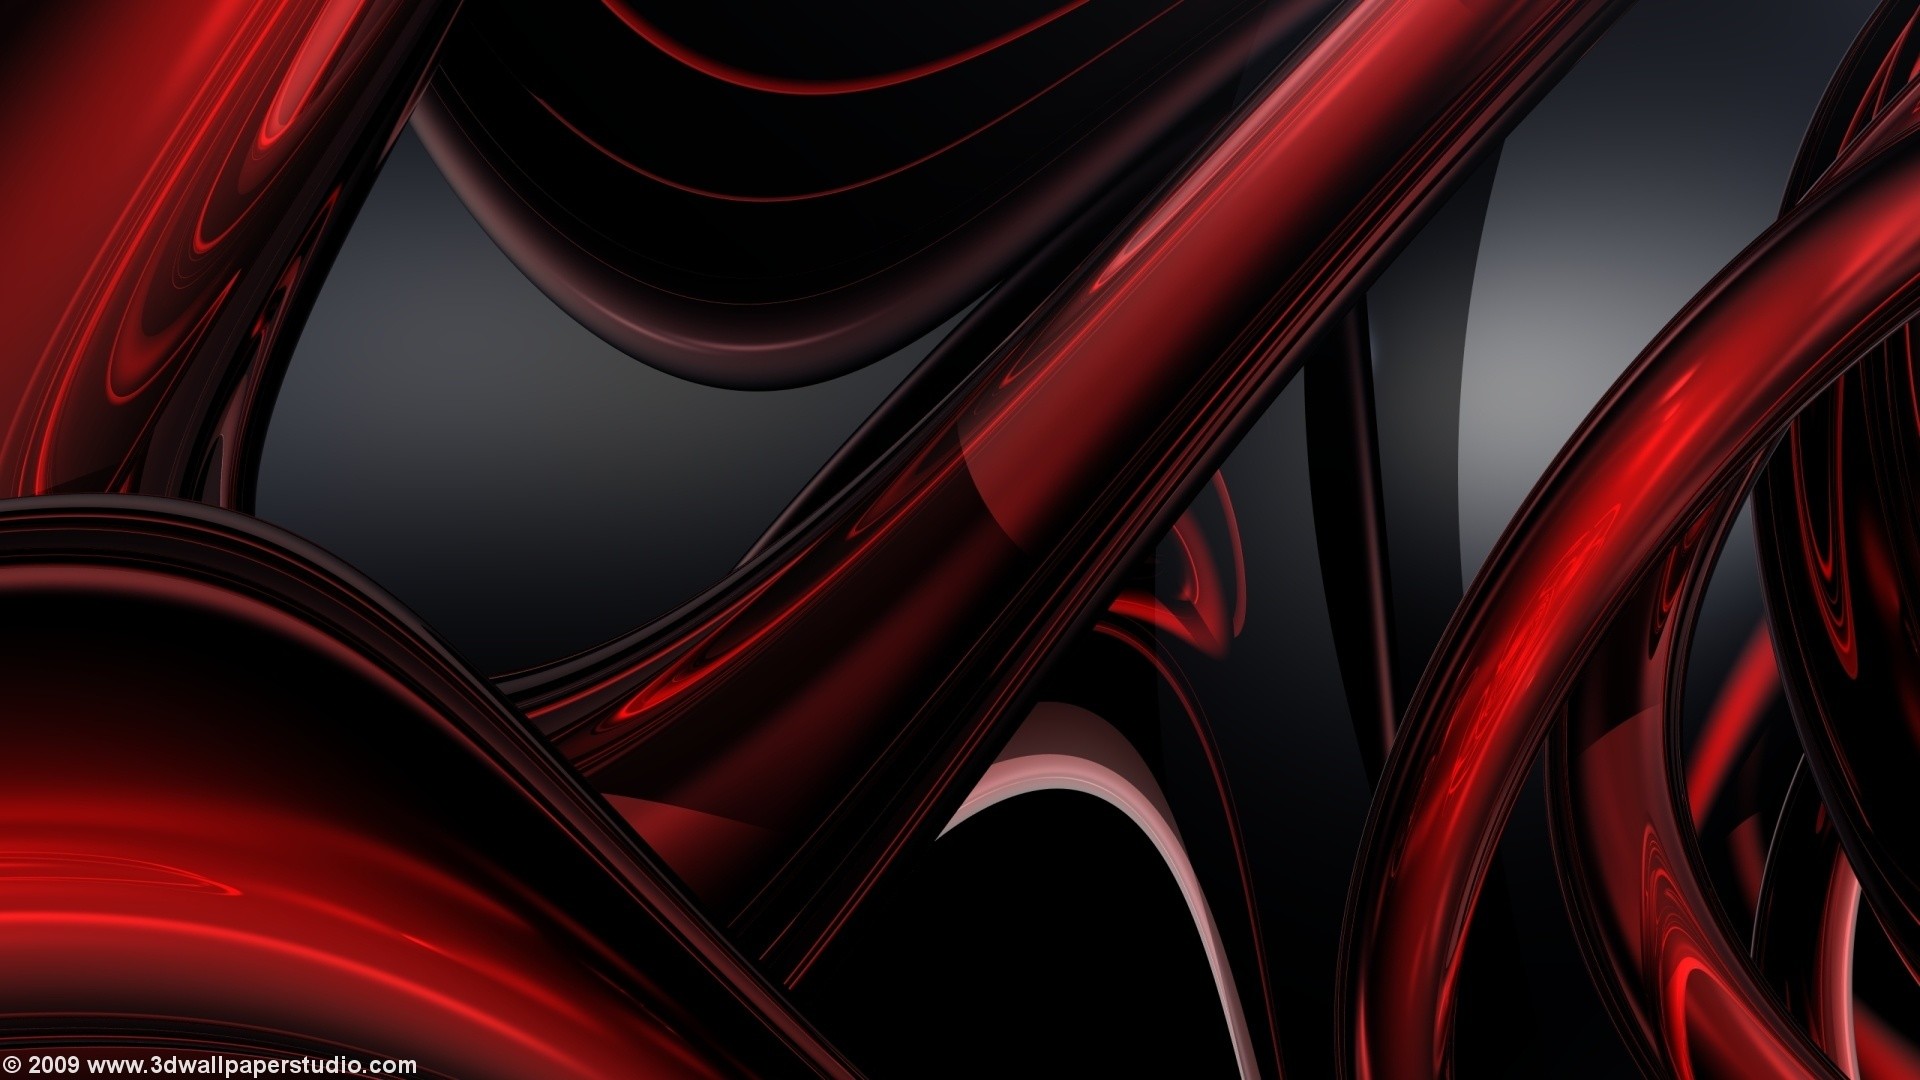 1920x1080 Red Abstract Desktop Backgrounds